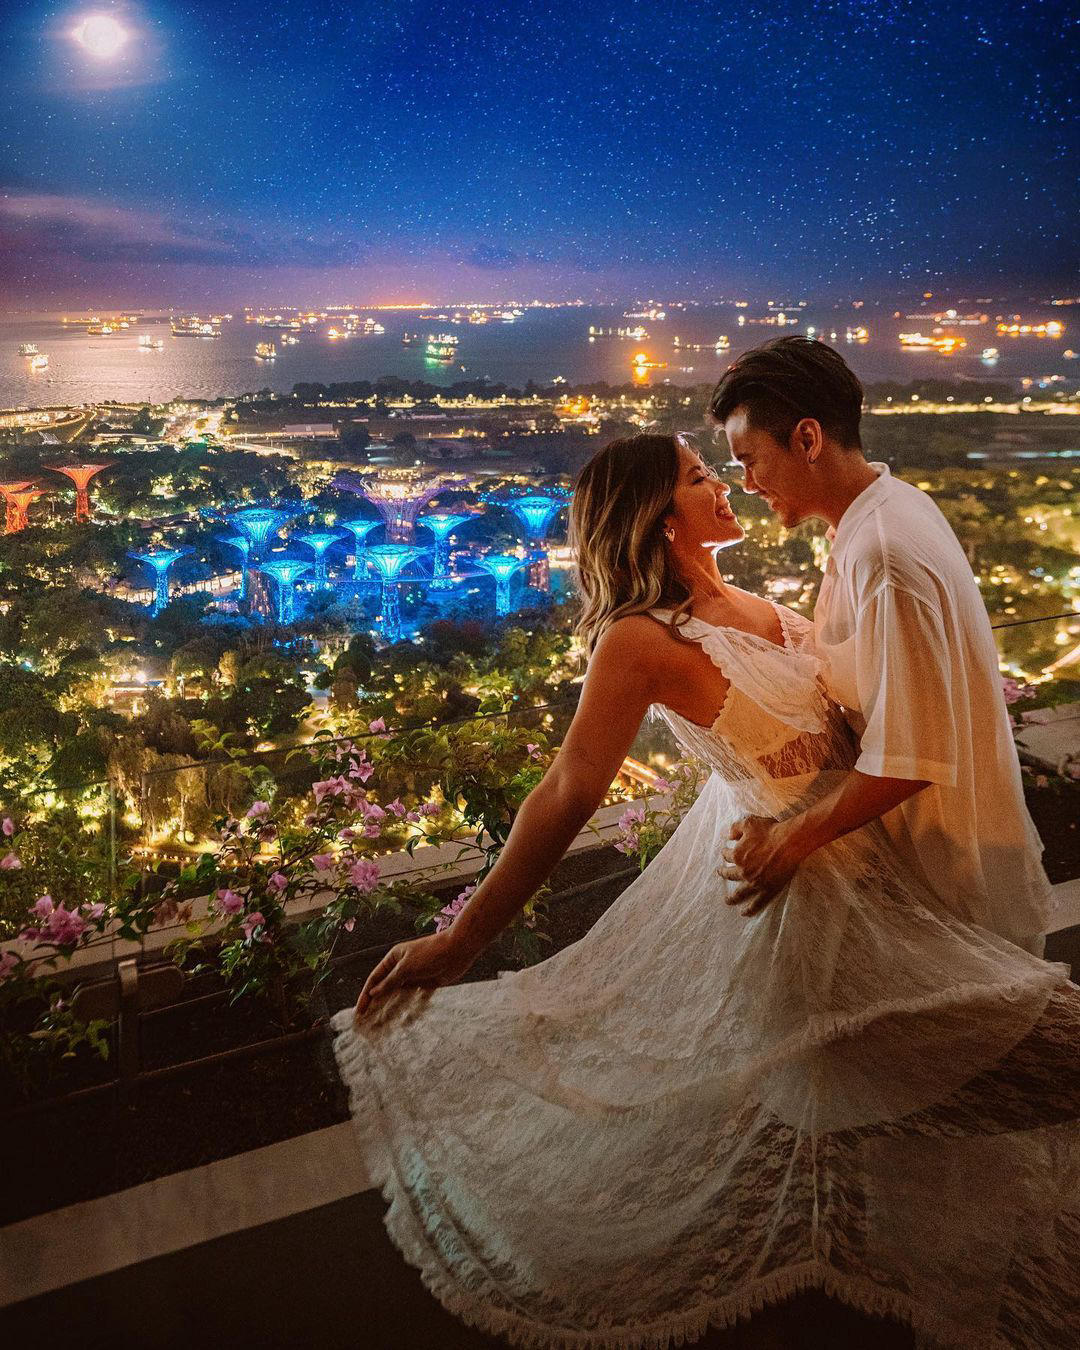 Here’s to dancing under the glittering sky with your brightest star this Valentine’s Day